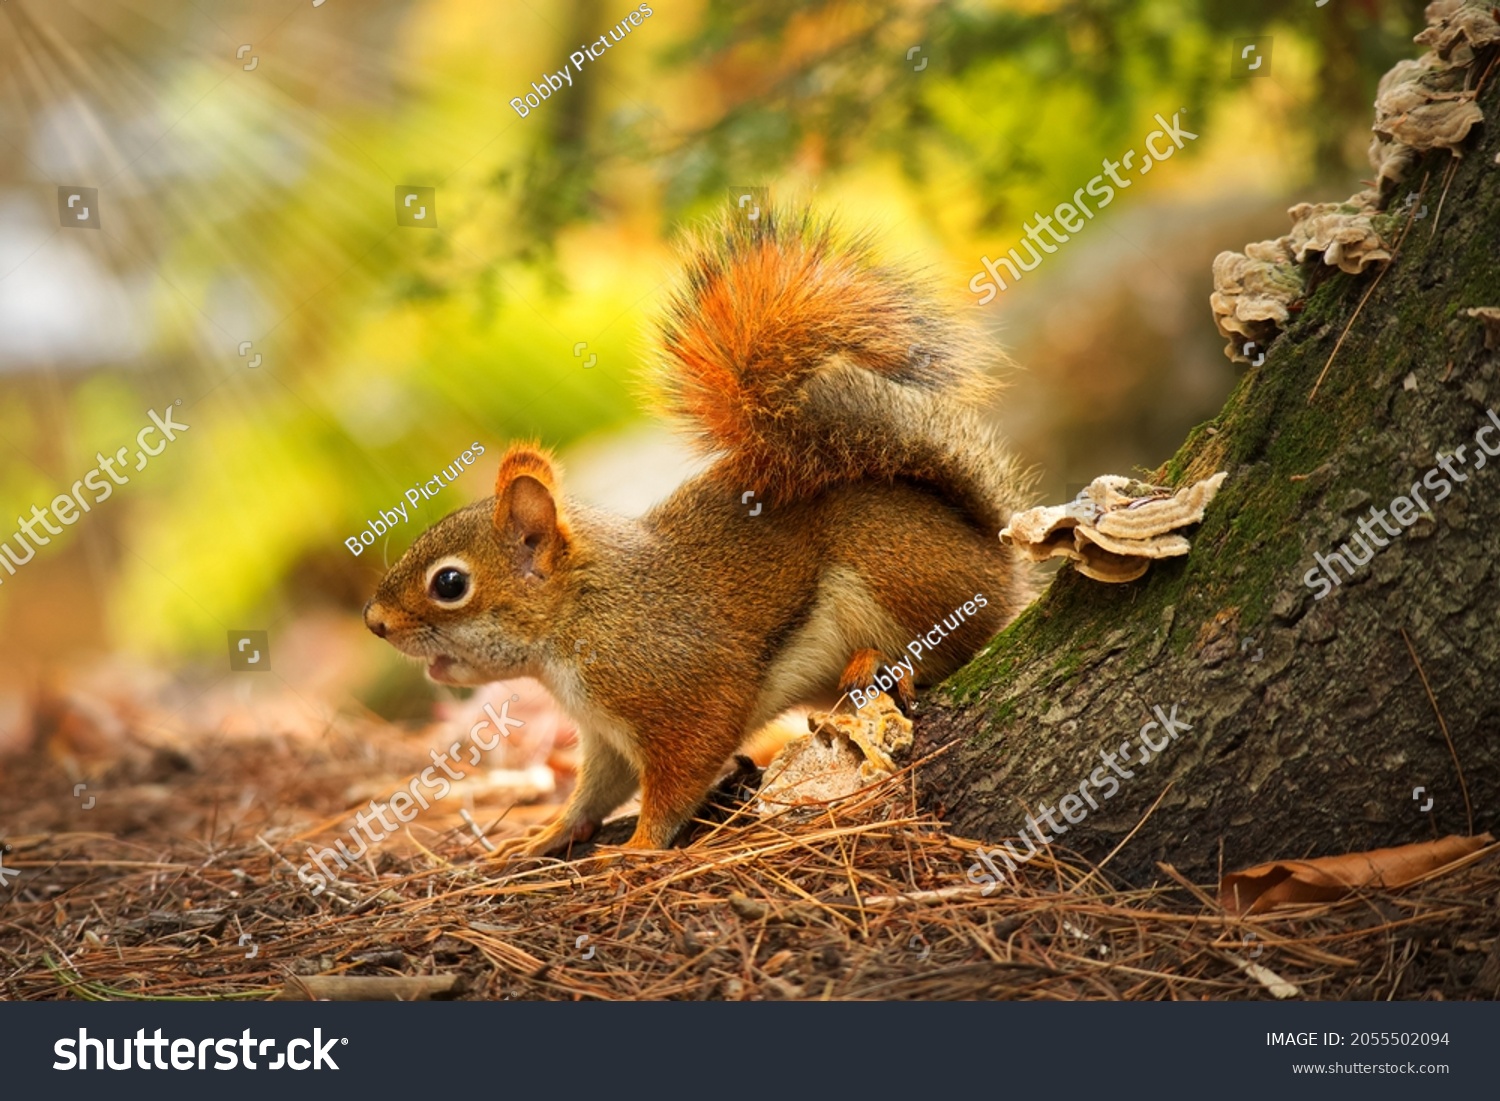 Cute red squirrel or sciurus vulgaris in focus with details standing next to tree trunk against bright green bokeh blurred background in the forest. Close up wildlife image of Eurasian rodent animal. #2055502094